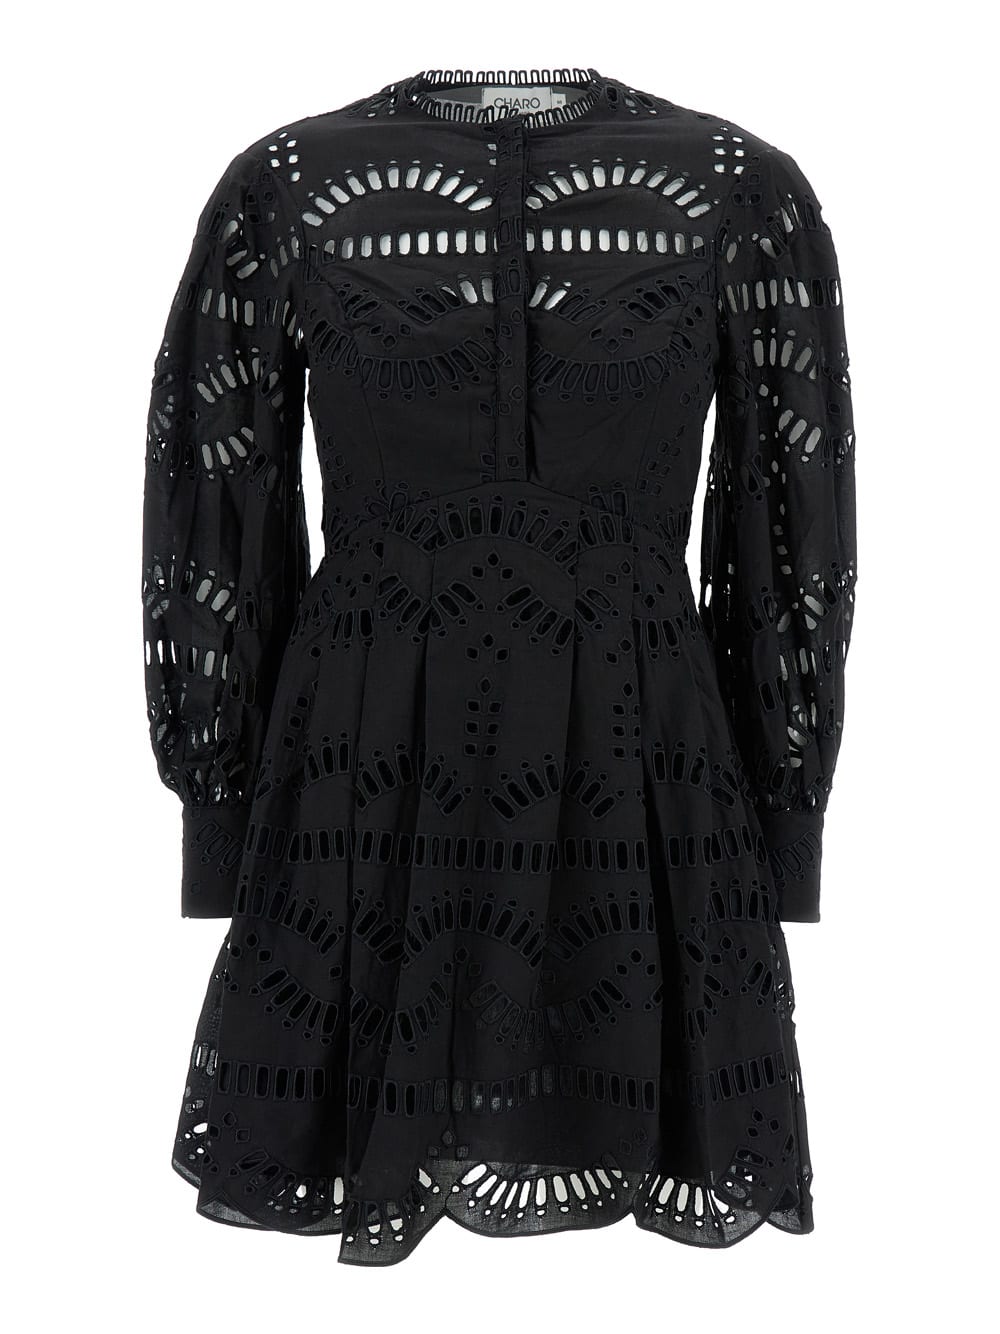 franca Mini Black Dress With Floreal Print In Cotton Blend Woman